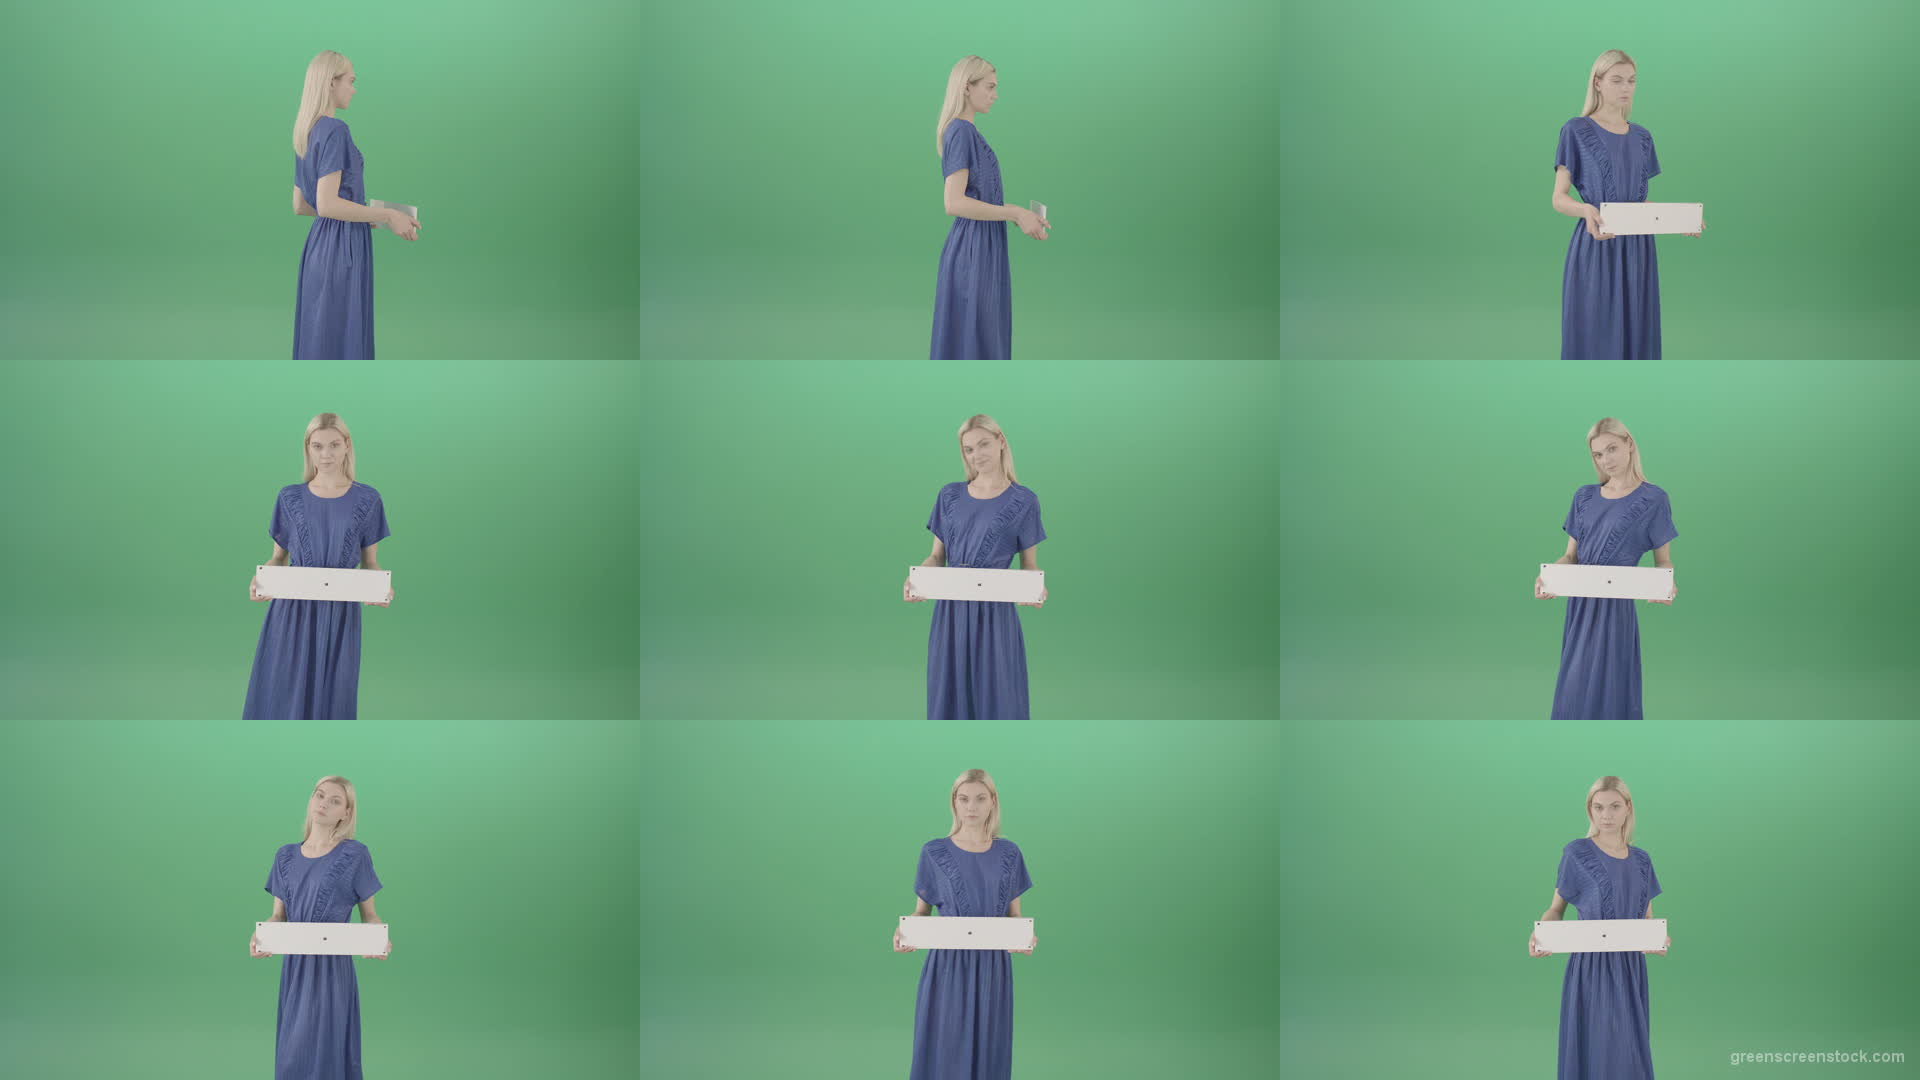 Housewife-in-blue-dress-and-with-text-plane-mockup-posing-isolated-on-Green-Screen-4K-Video-Footage-1-1920 Green Screen Stock